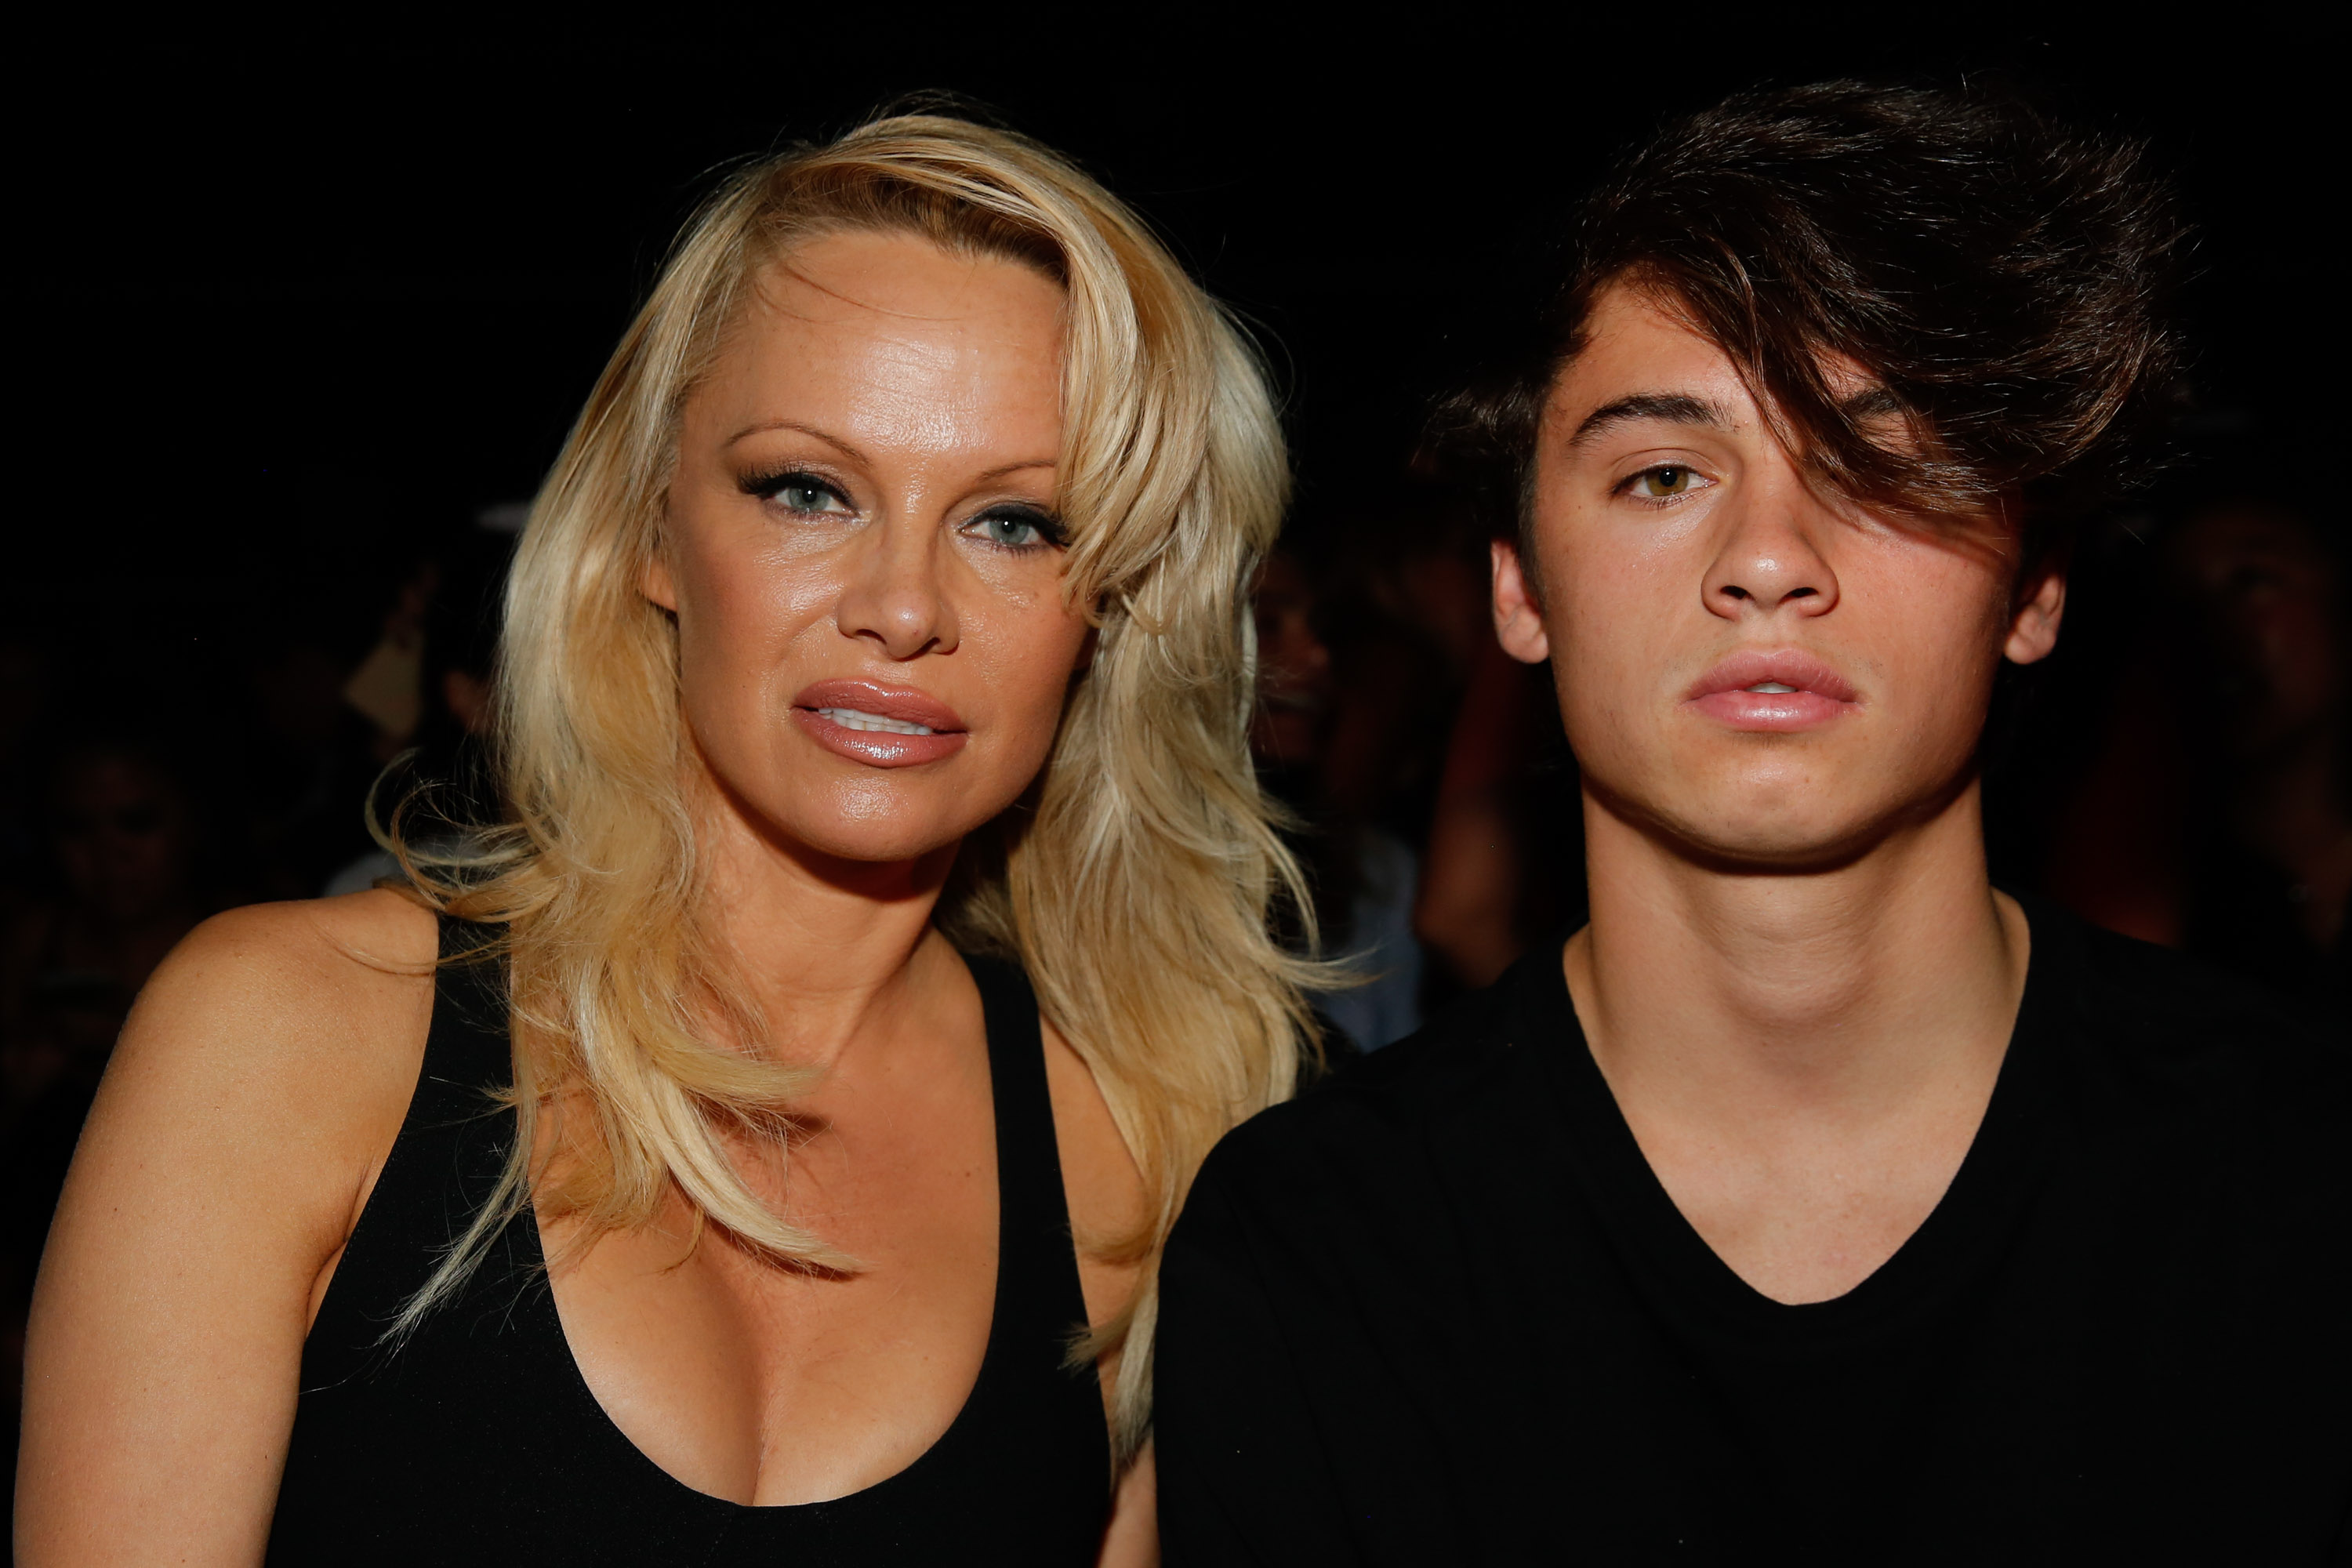 Pamela Anderson and Dylan Lee at the Alexander Wang Spring 2017 fashion show during New York Fashion Week at Pier 94 in New York City on September 10, 2016 | Source: Getty Images